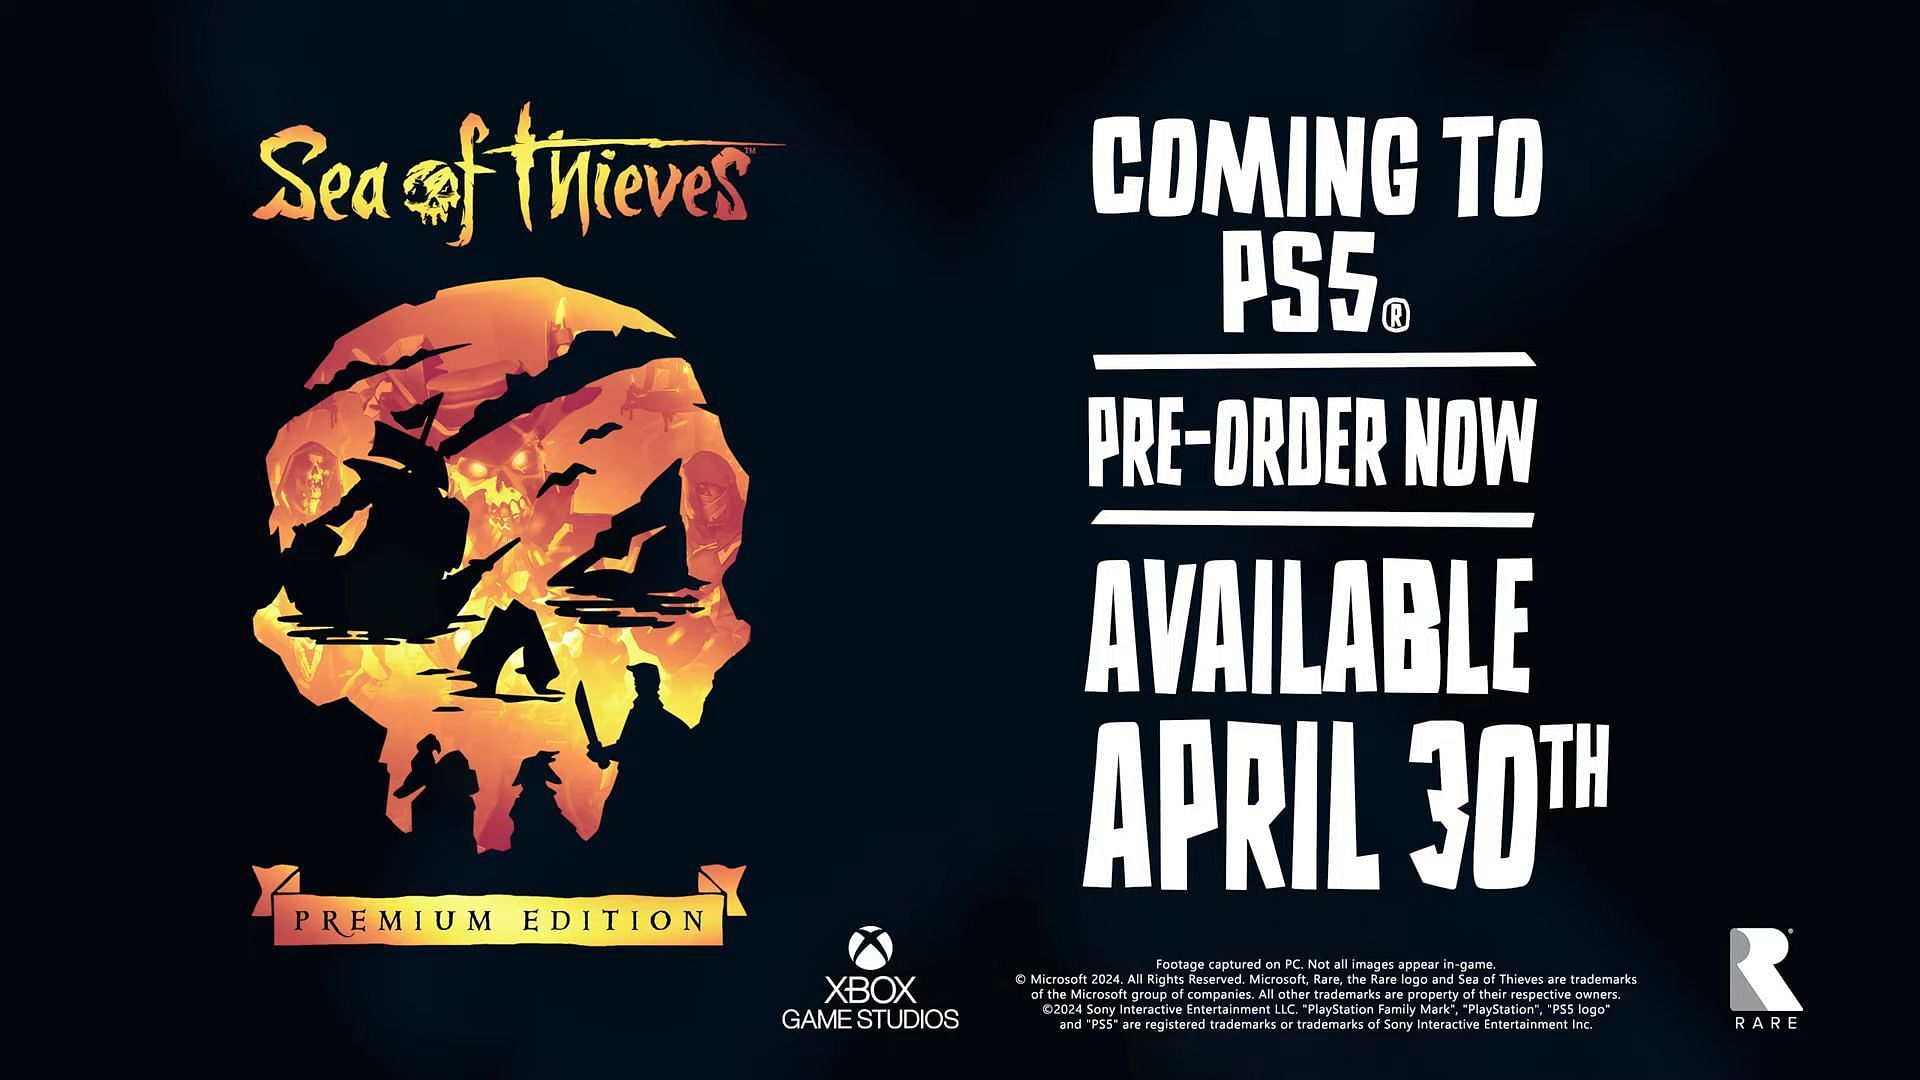 You can now pre-order Sea of Thieves for PS5.